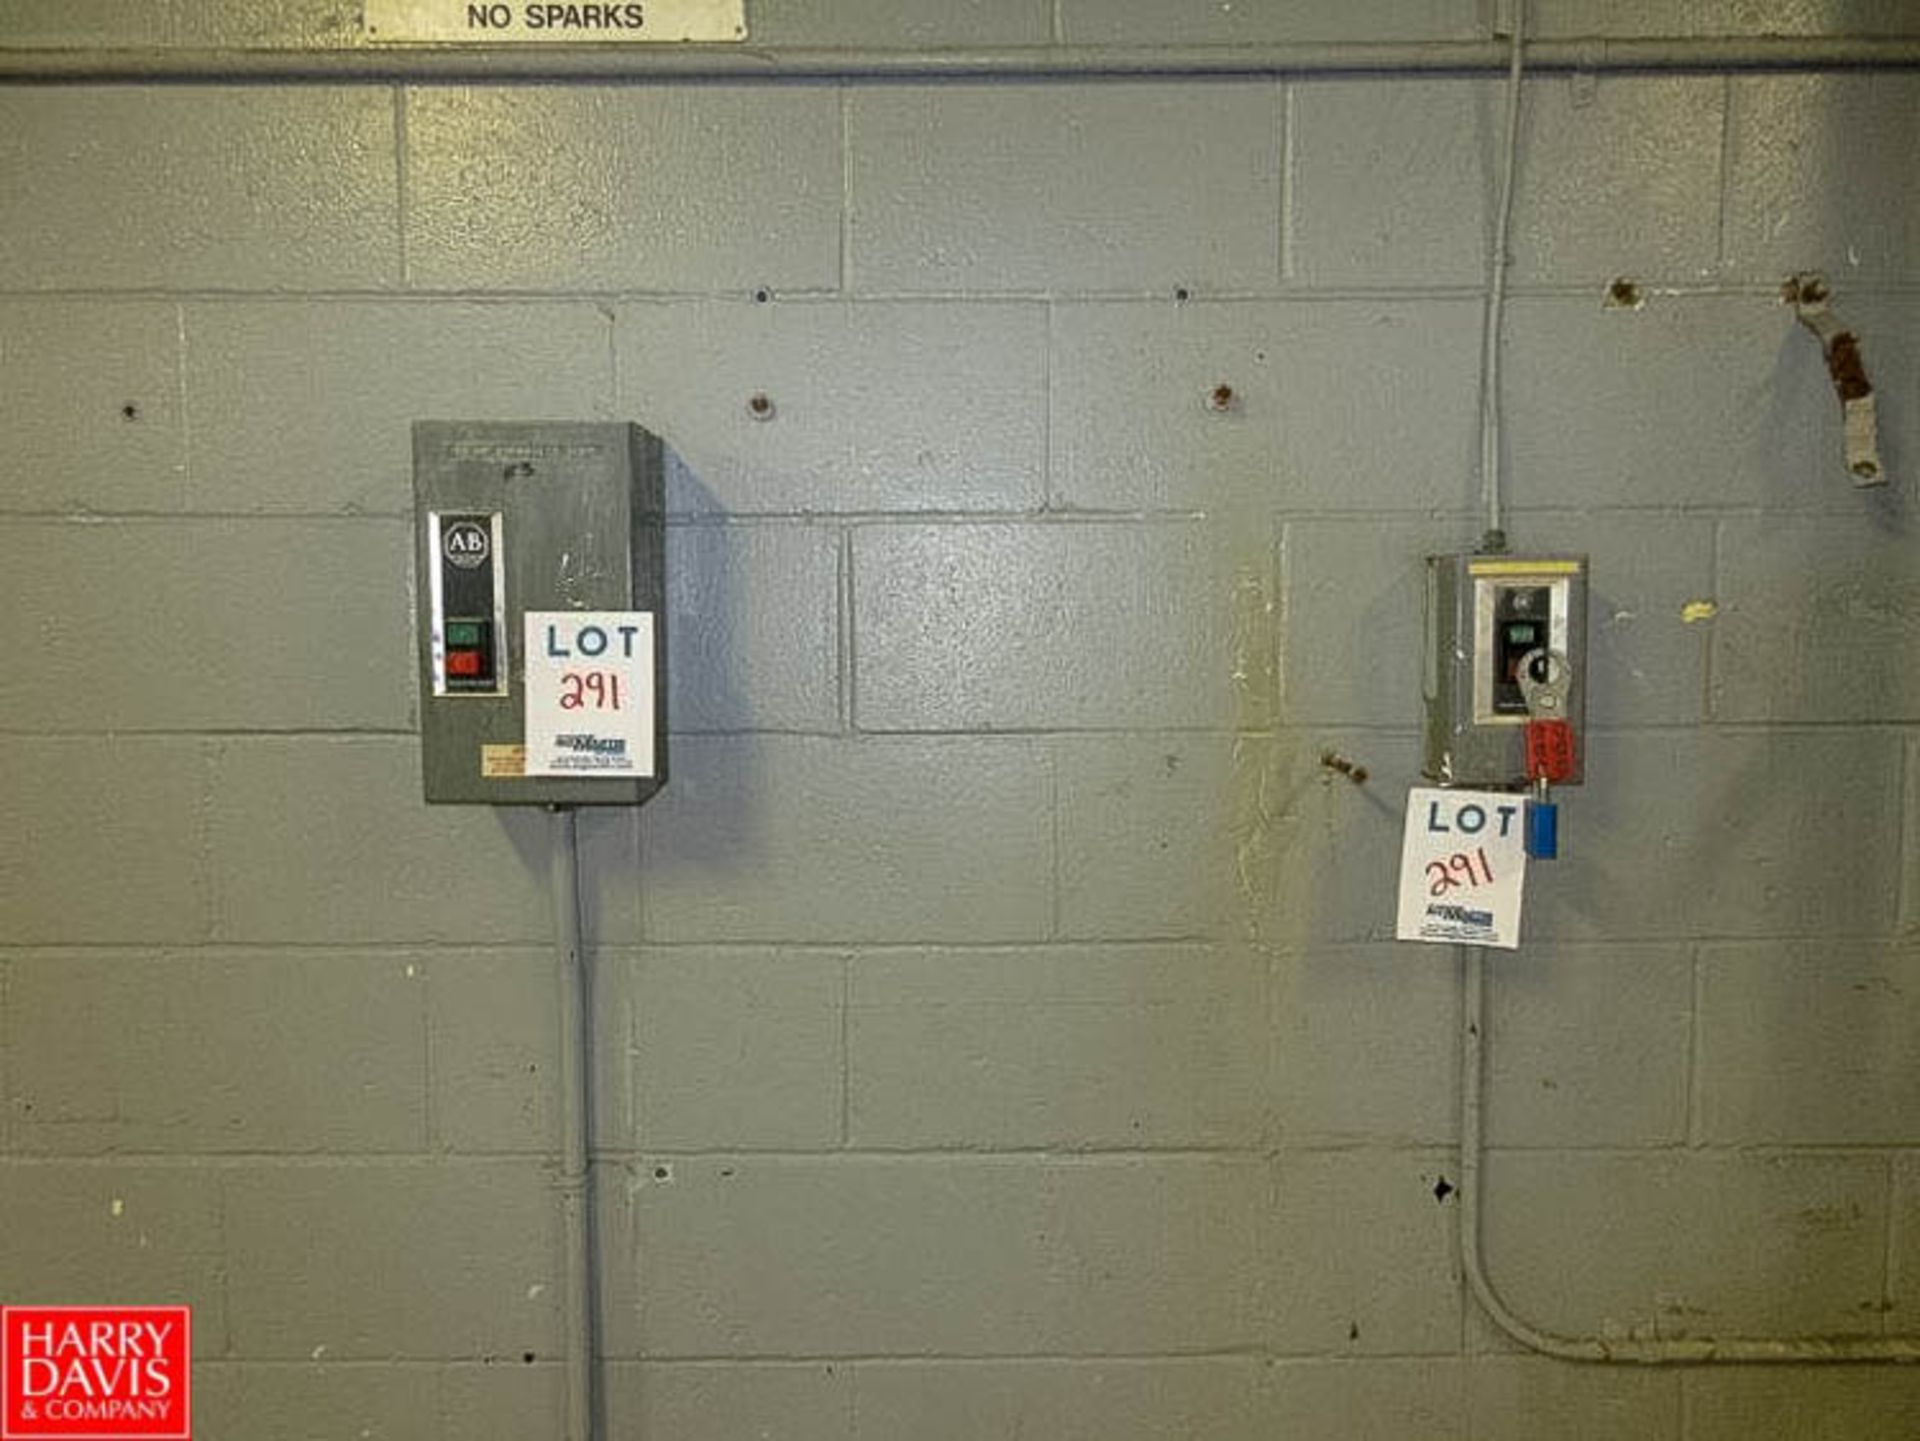 (2) Electrical Starter Switches, 600 Volts Rigging Fee: 23